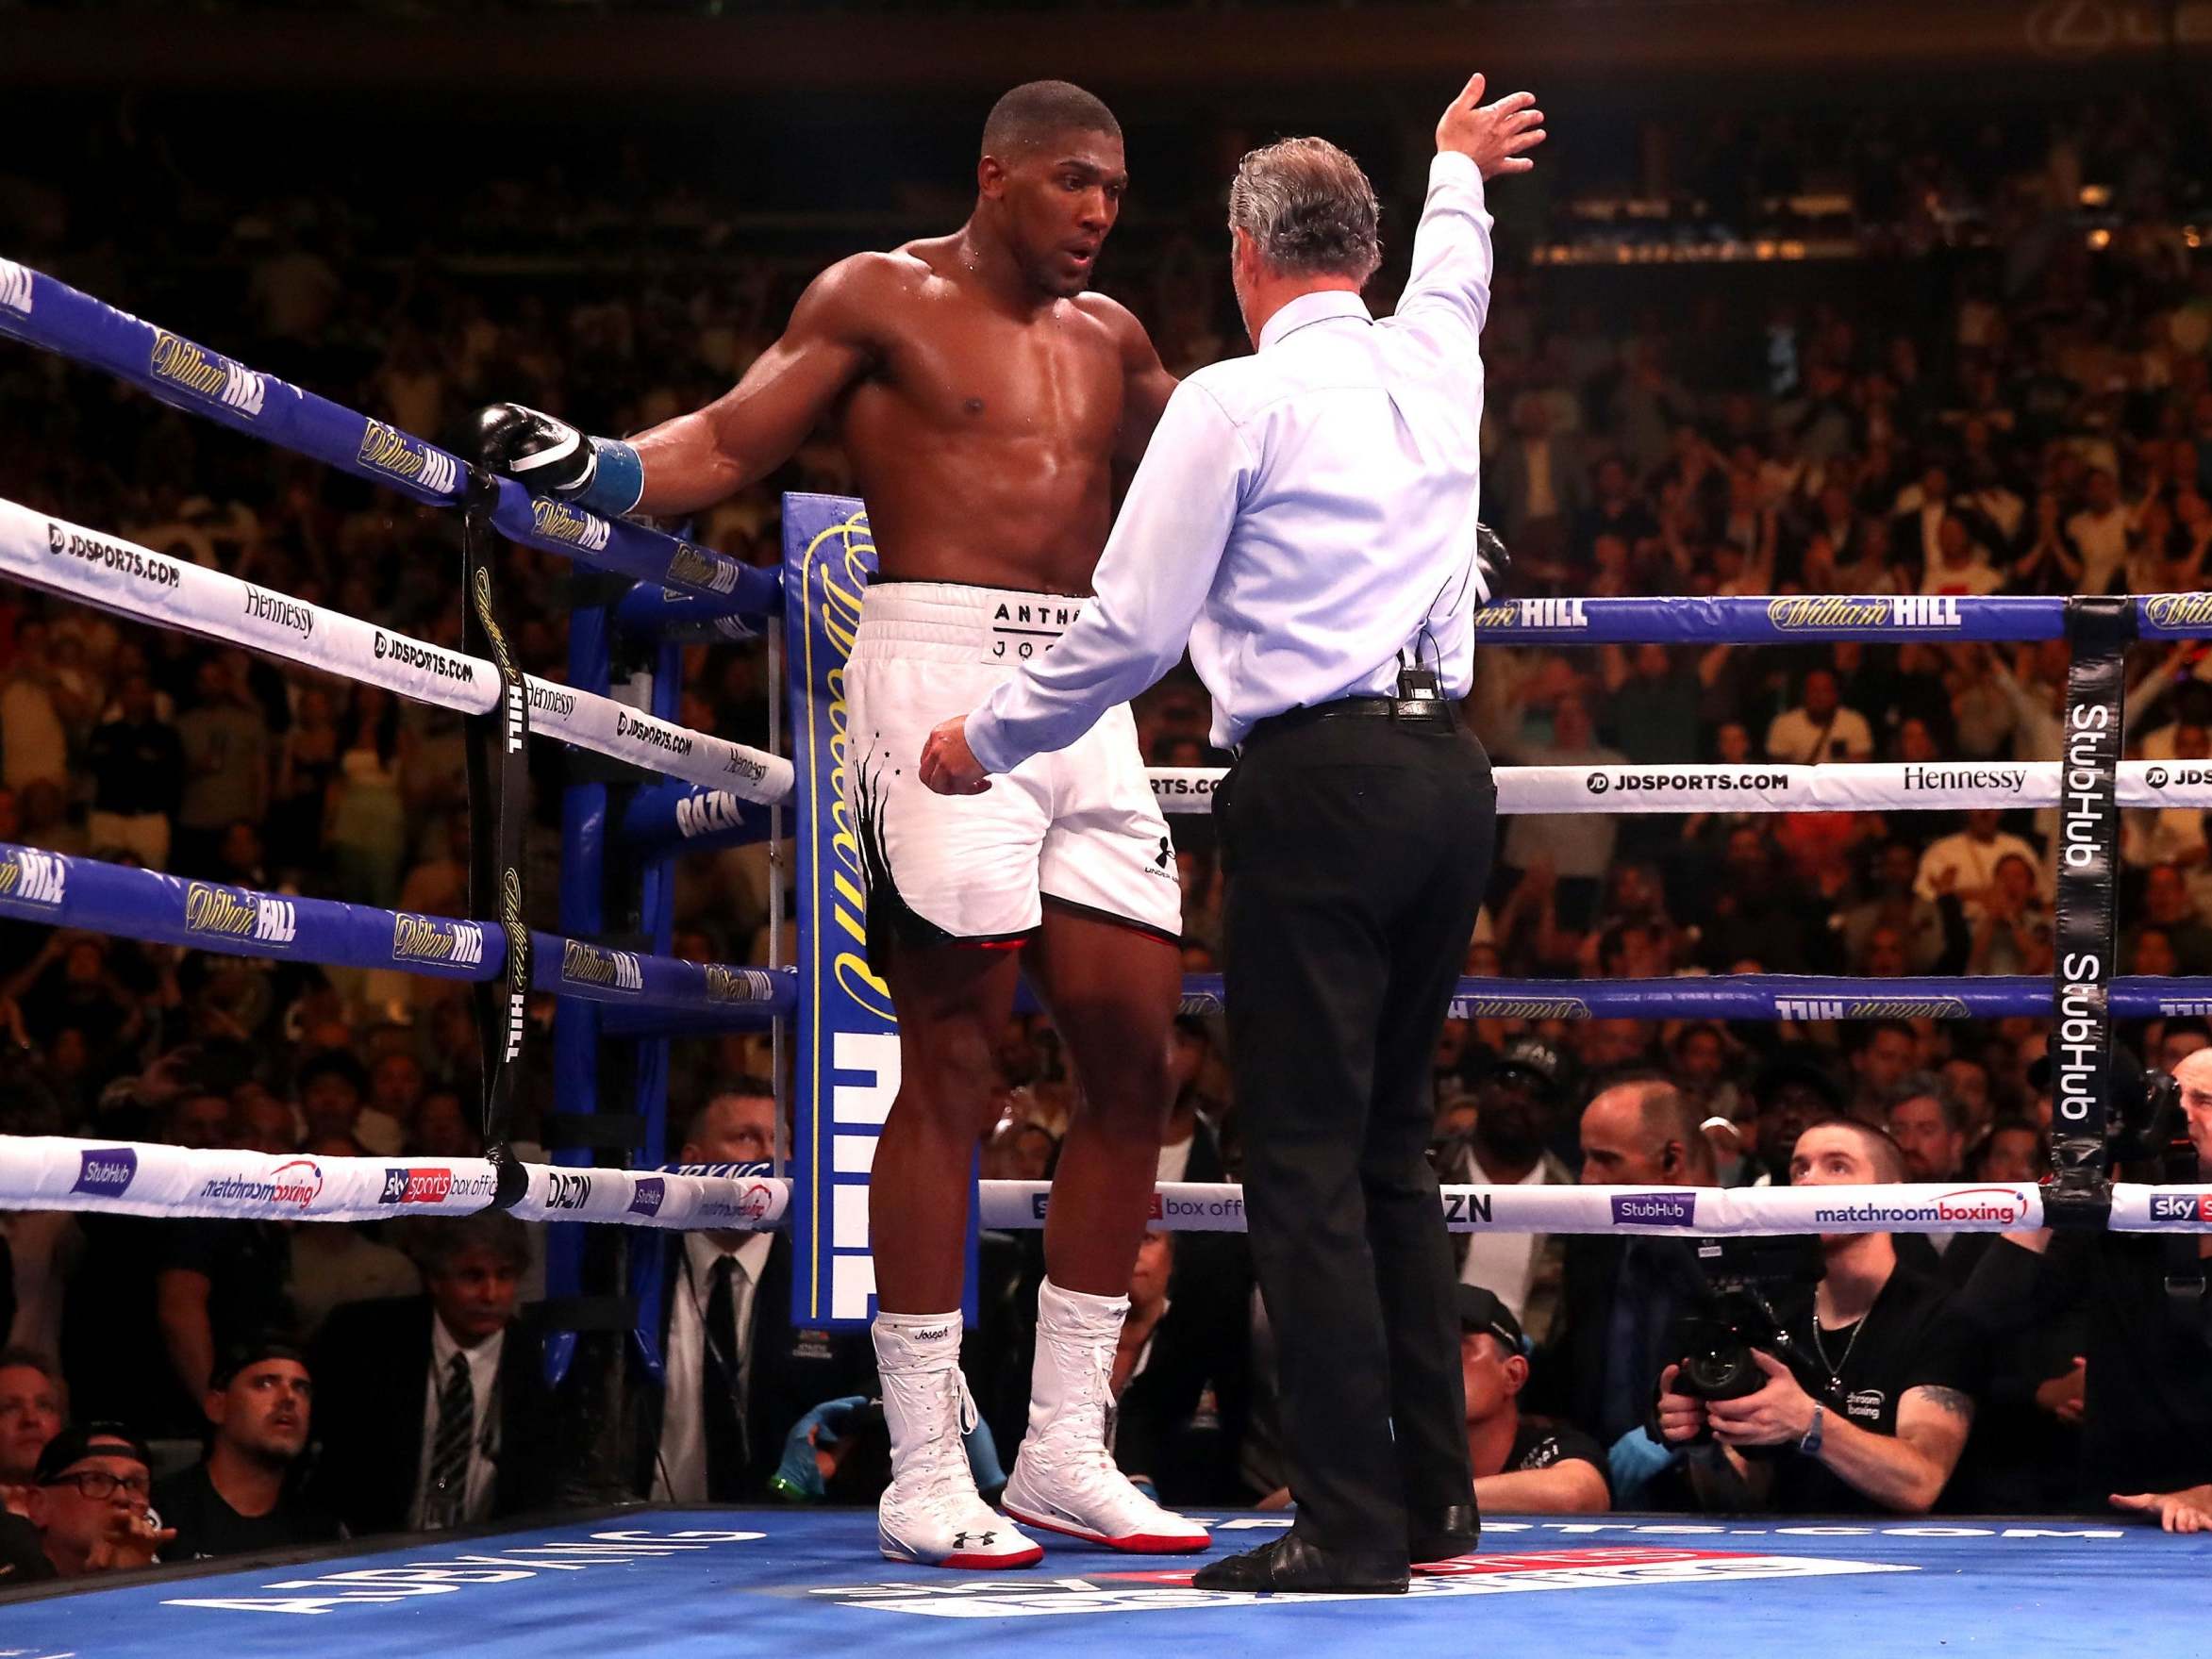 Anthony Joshua was knocked down four times in the bout